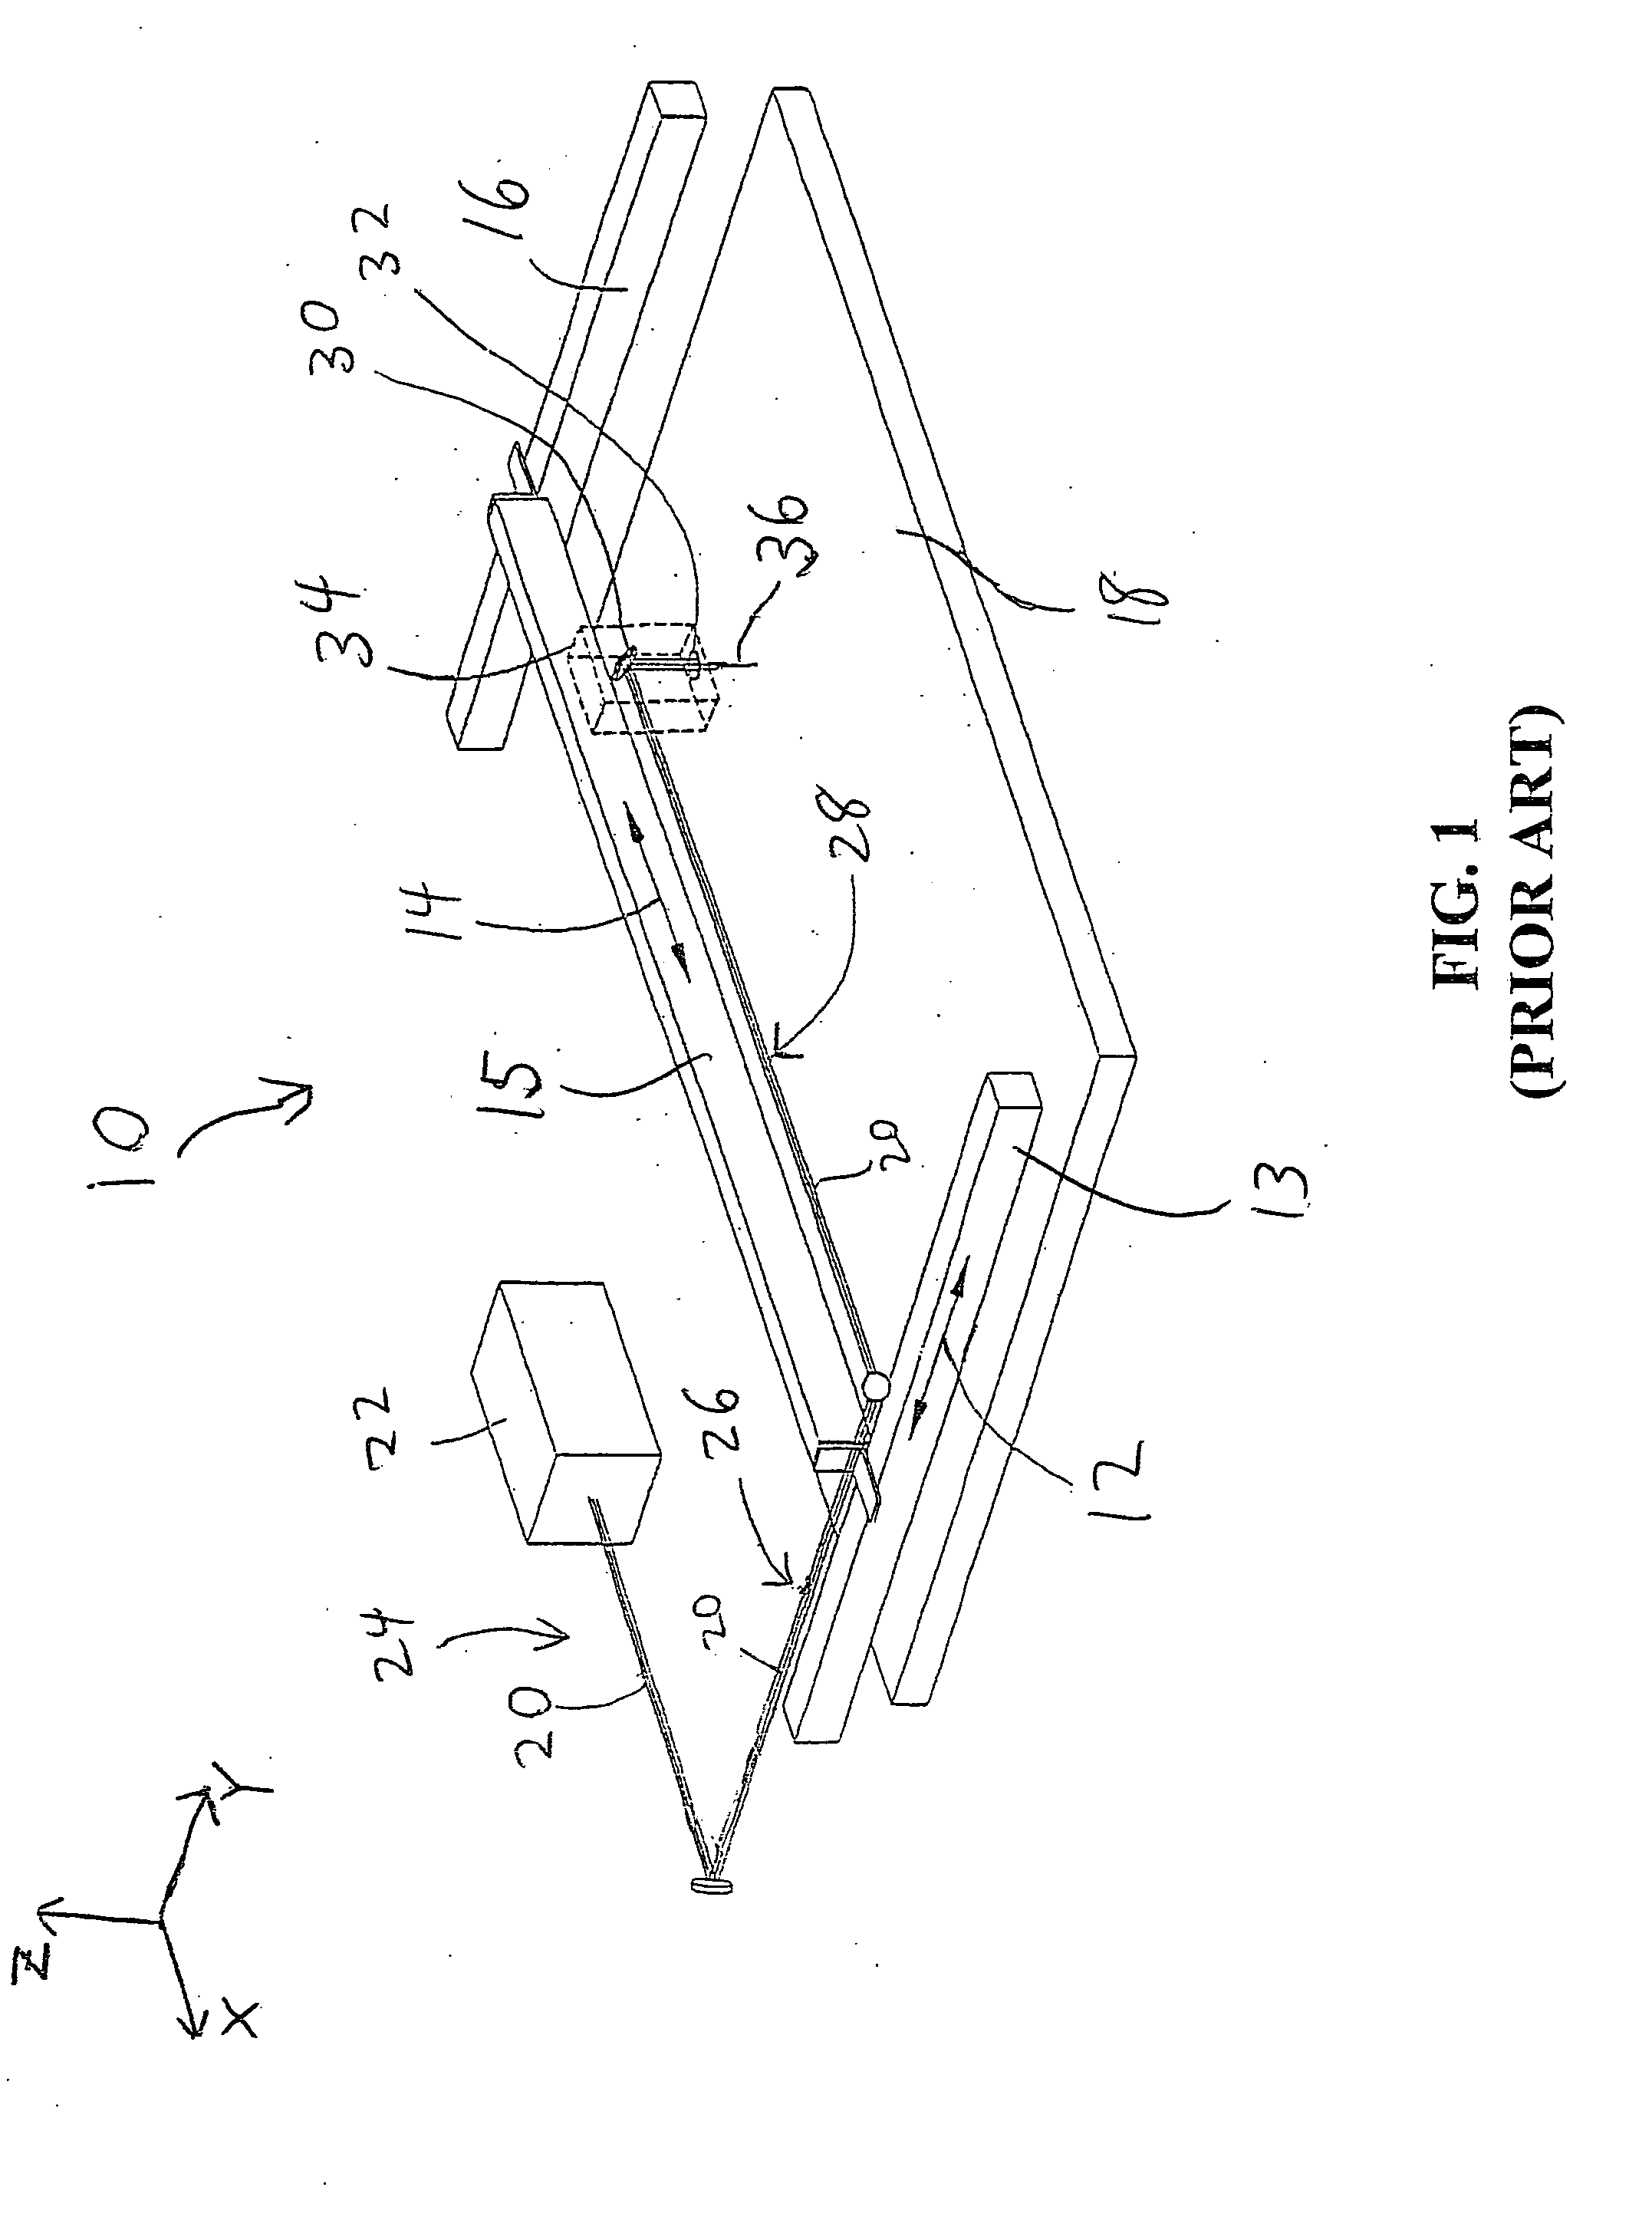 Laser material processing system